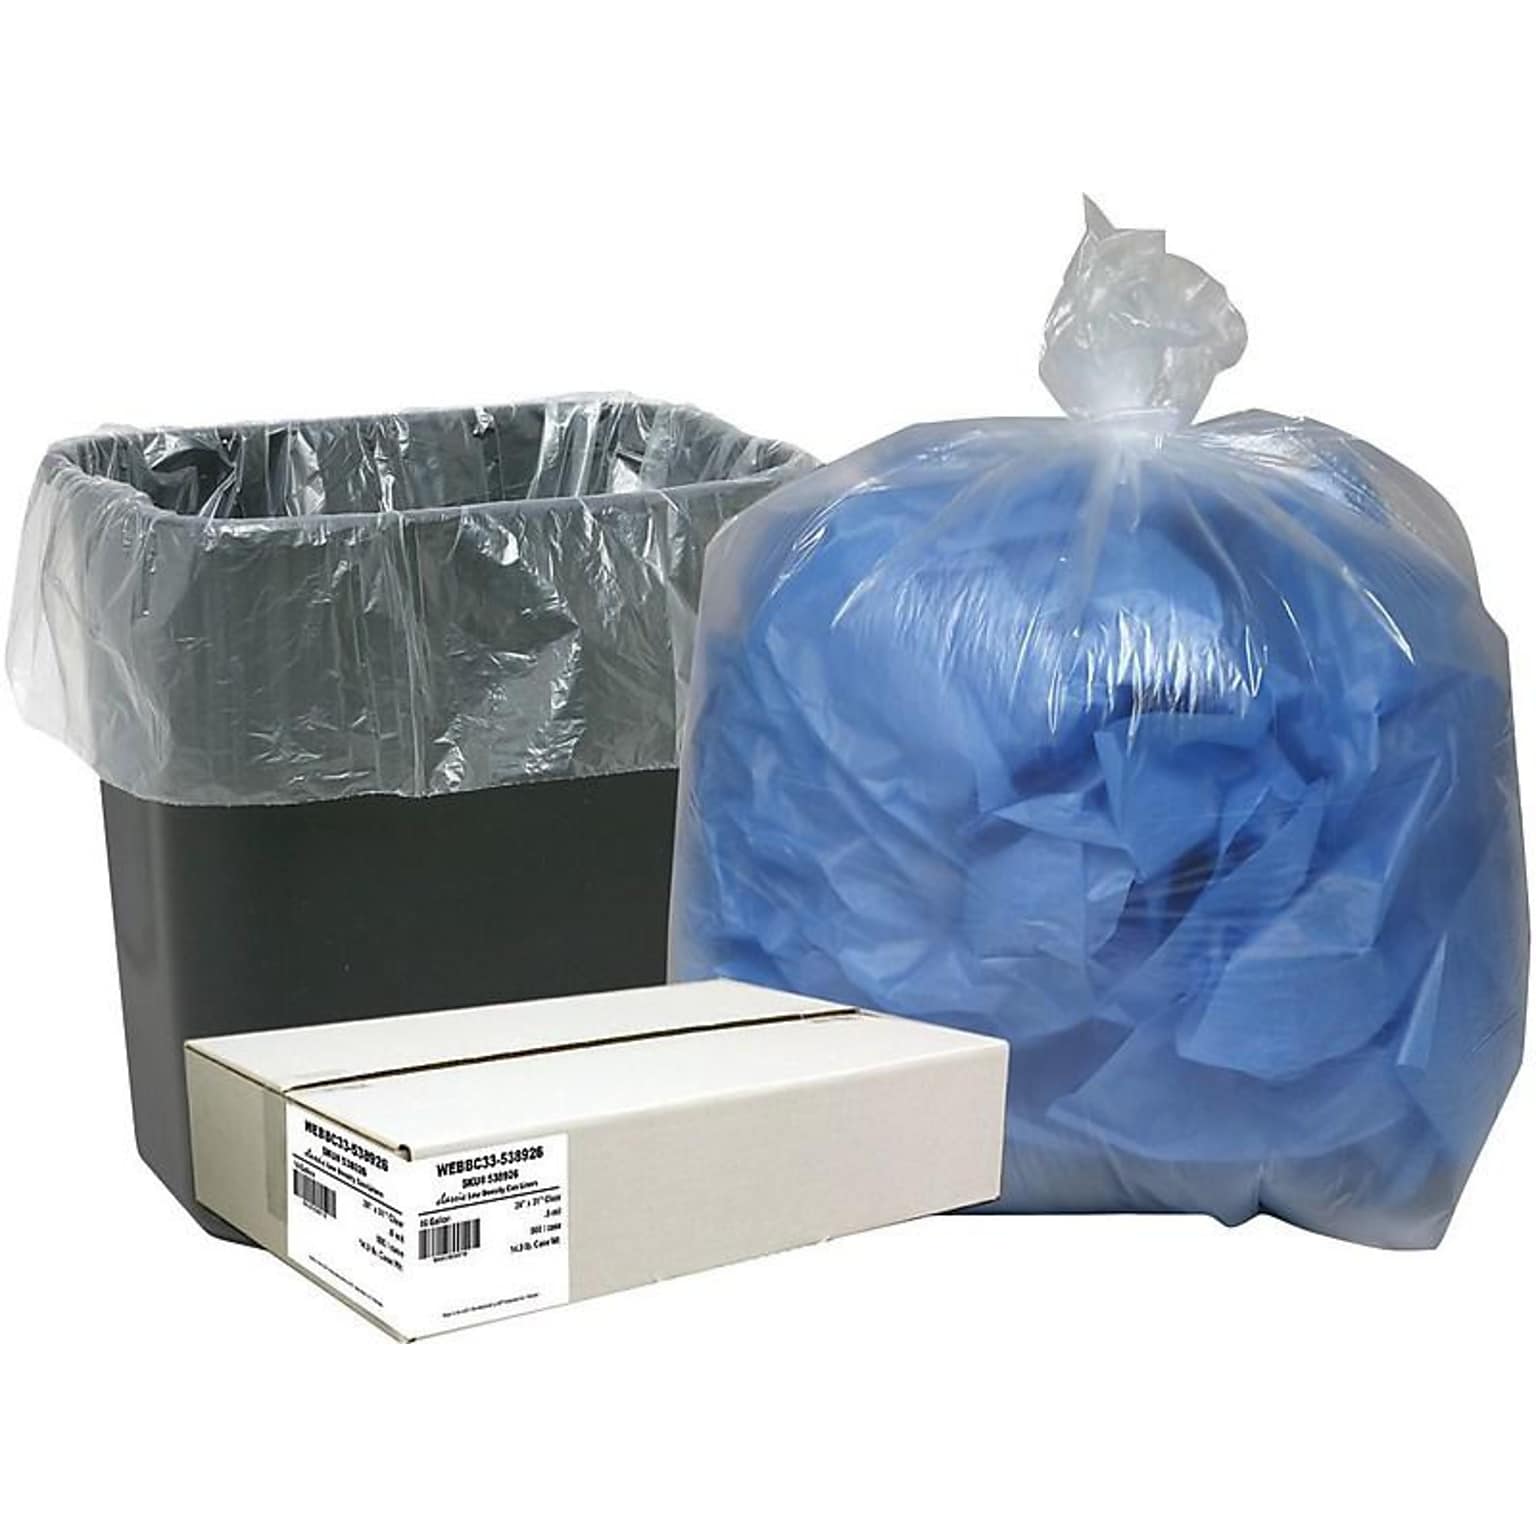 Berry Global Classic 16 Gallon Industrial Trash Bag, 24 x 31, Low Density, 0.6mil, Clear, 500 Bags/Box (WEBBC33-538926)